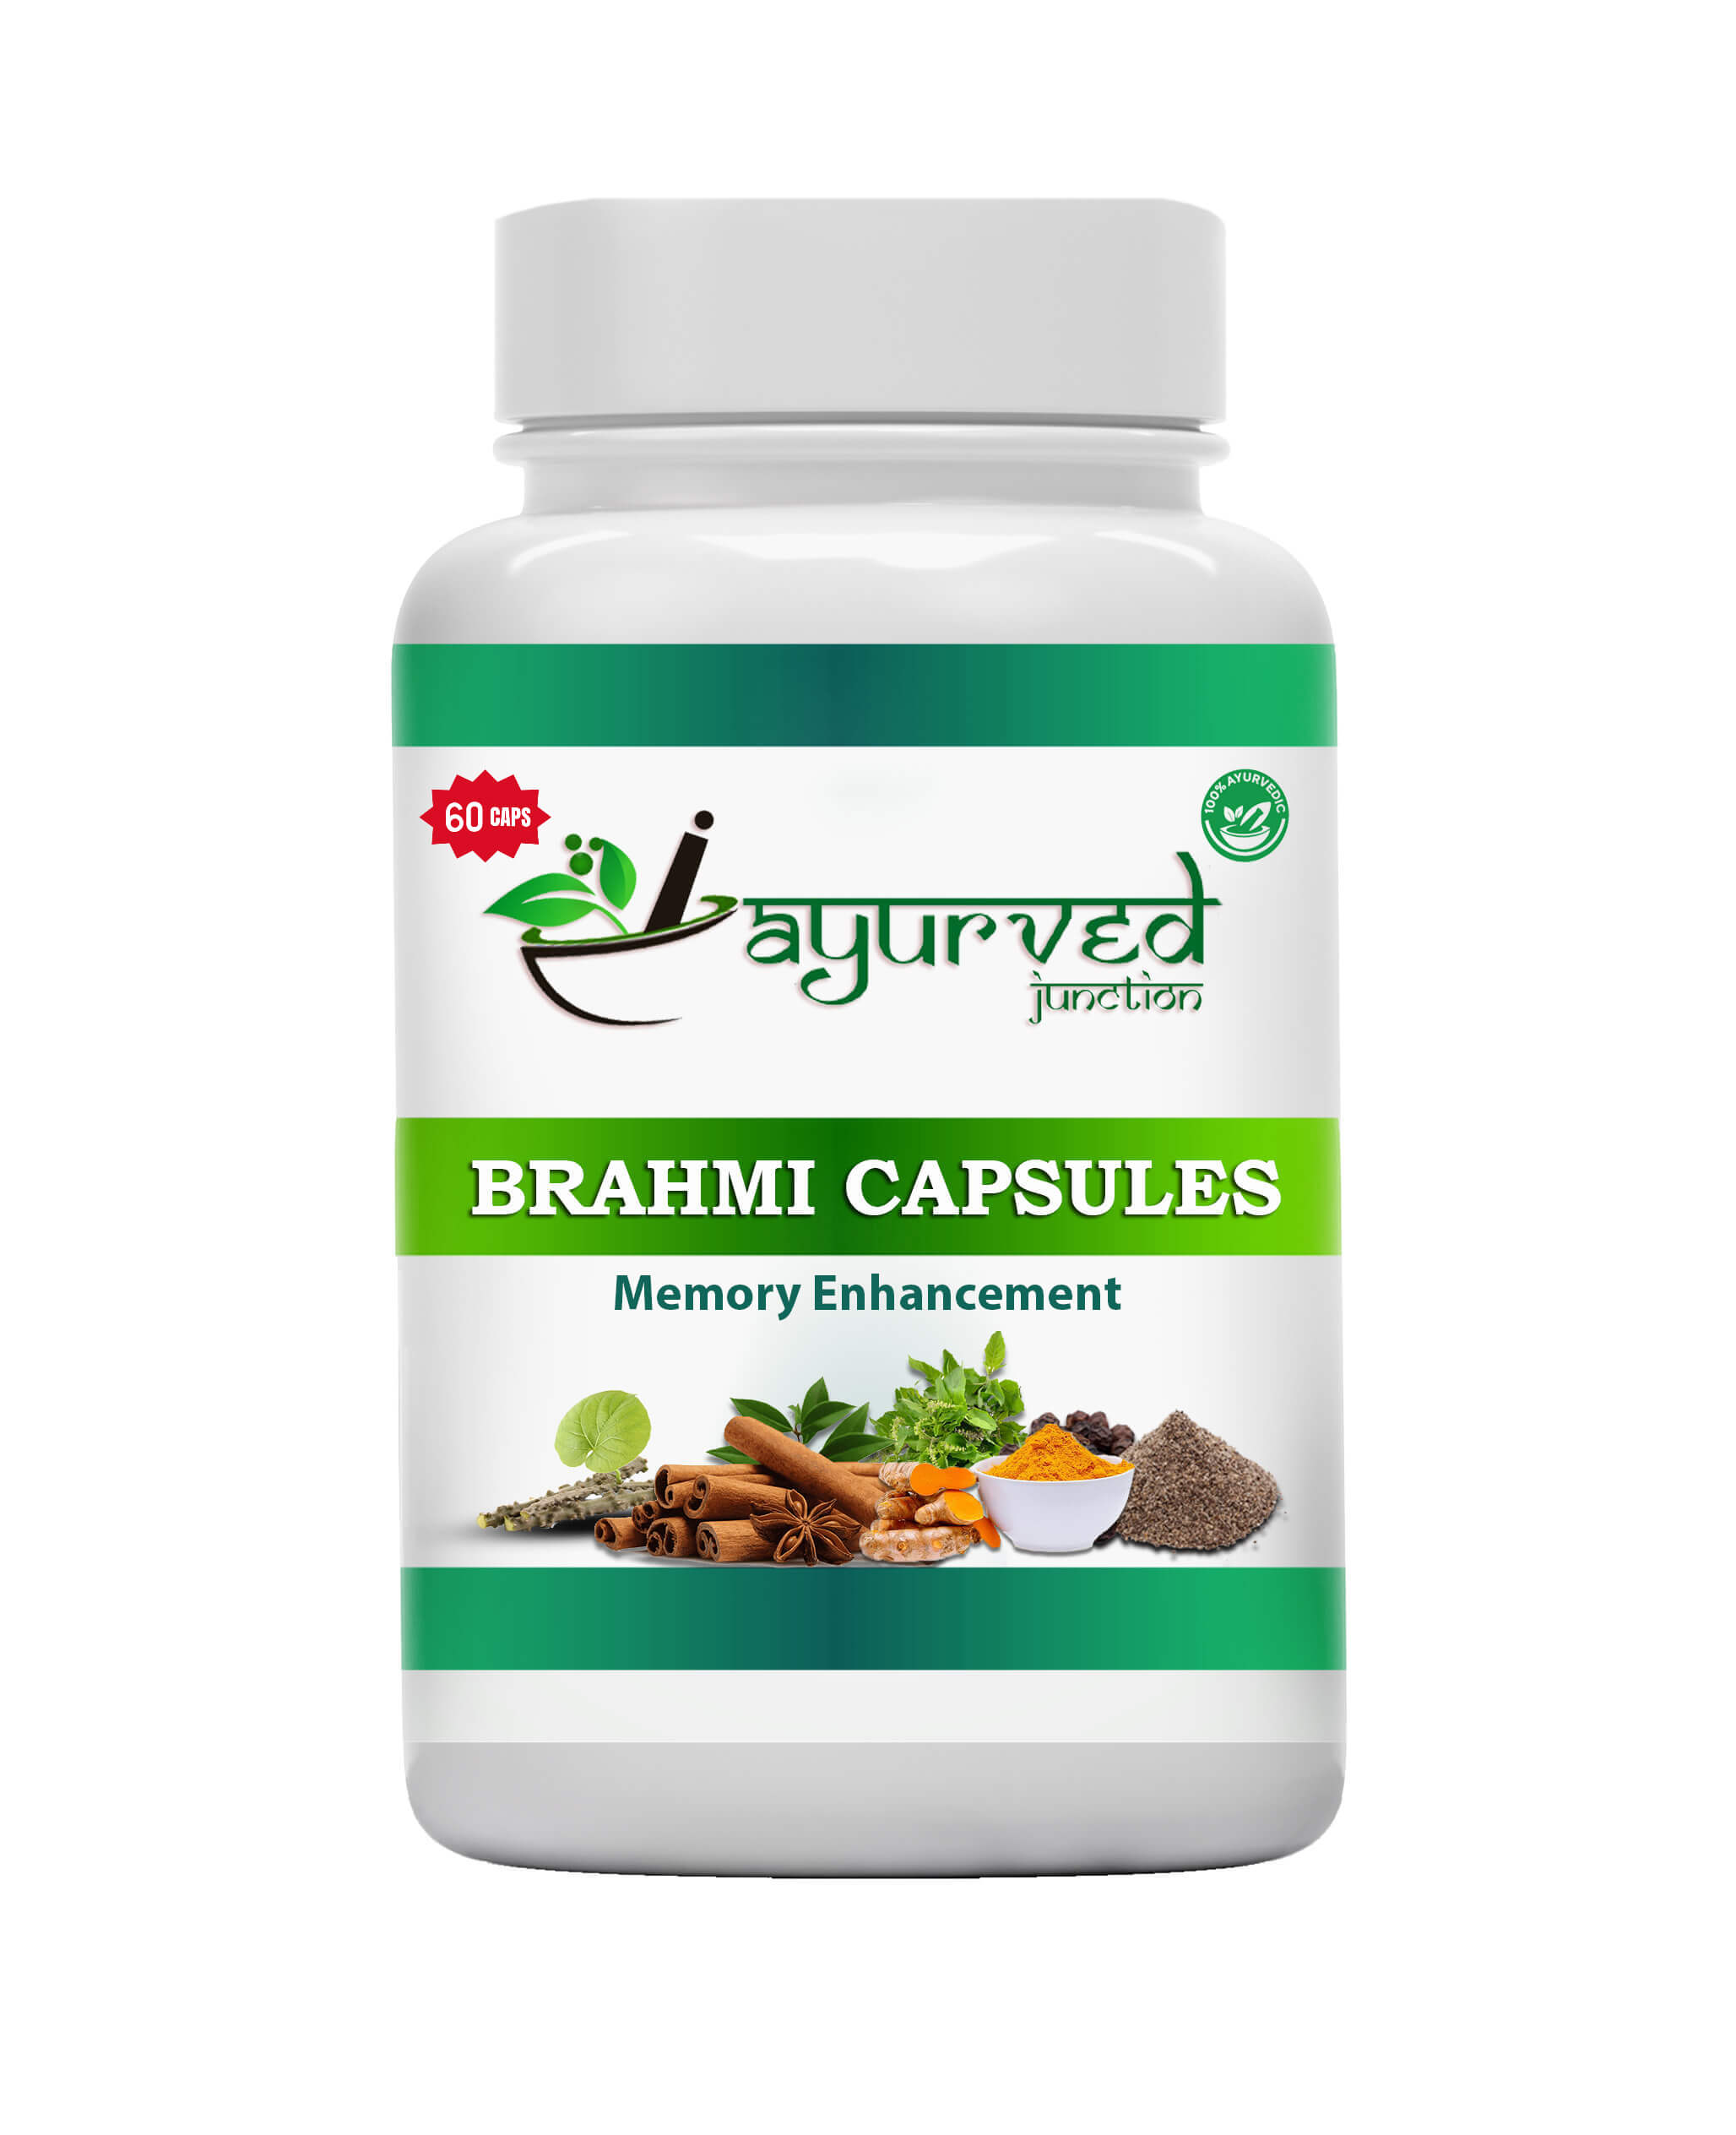 Enhance Cognitive Function and Unlock Mental Clarity with Brahmi Capsules